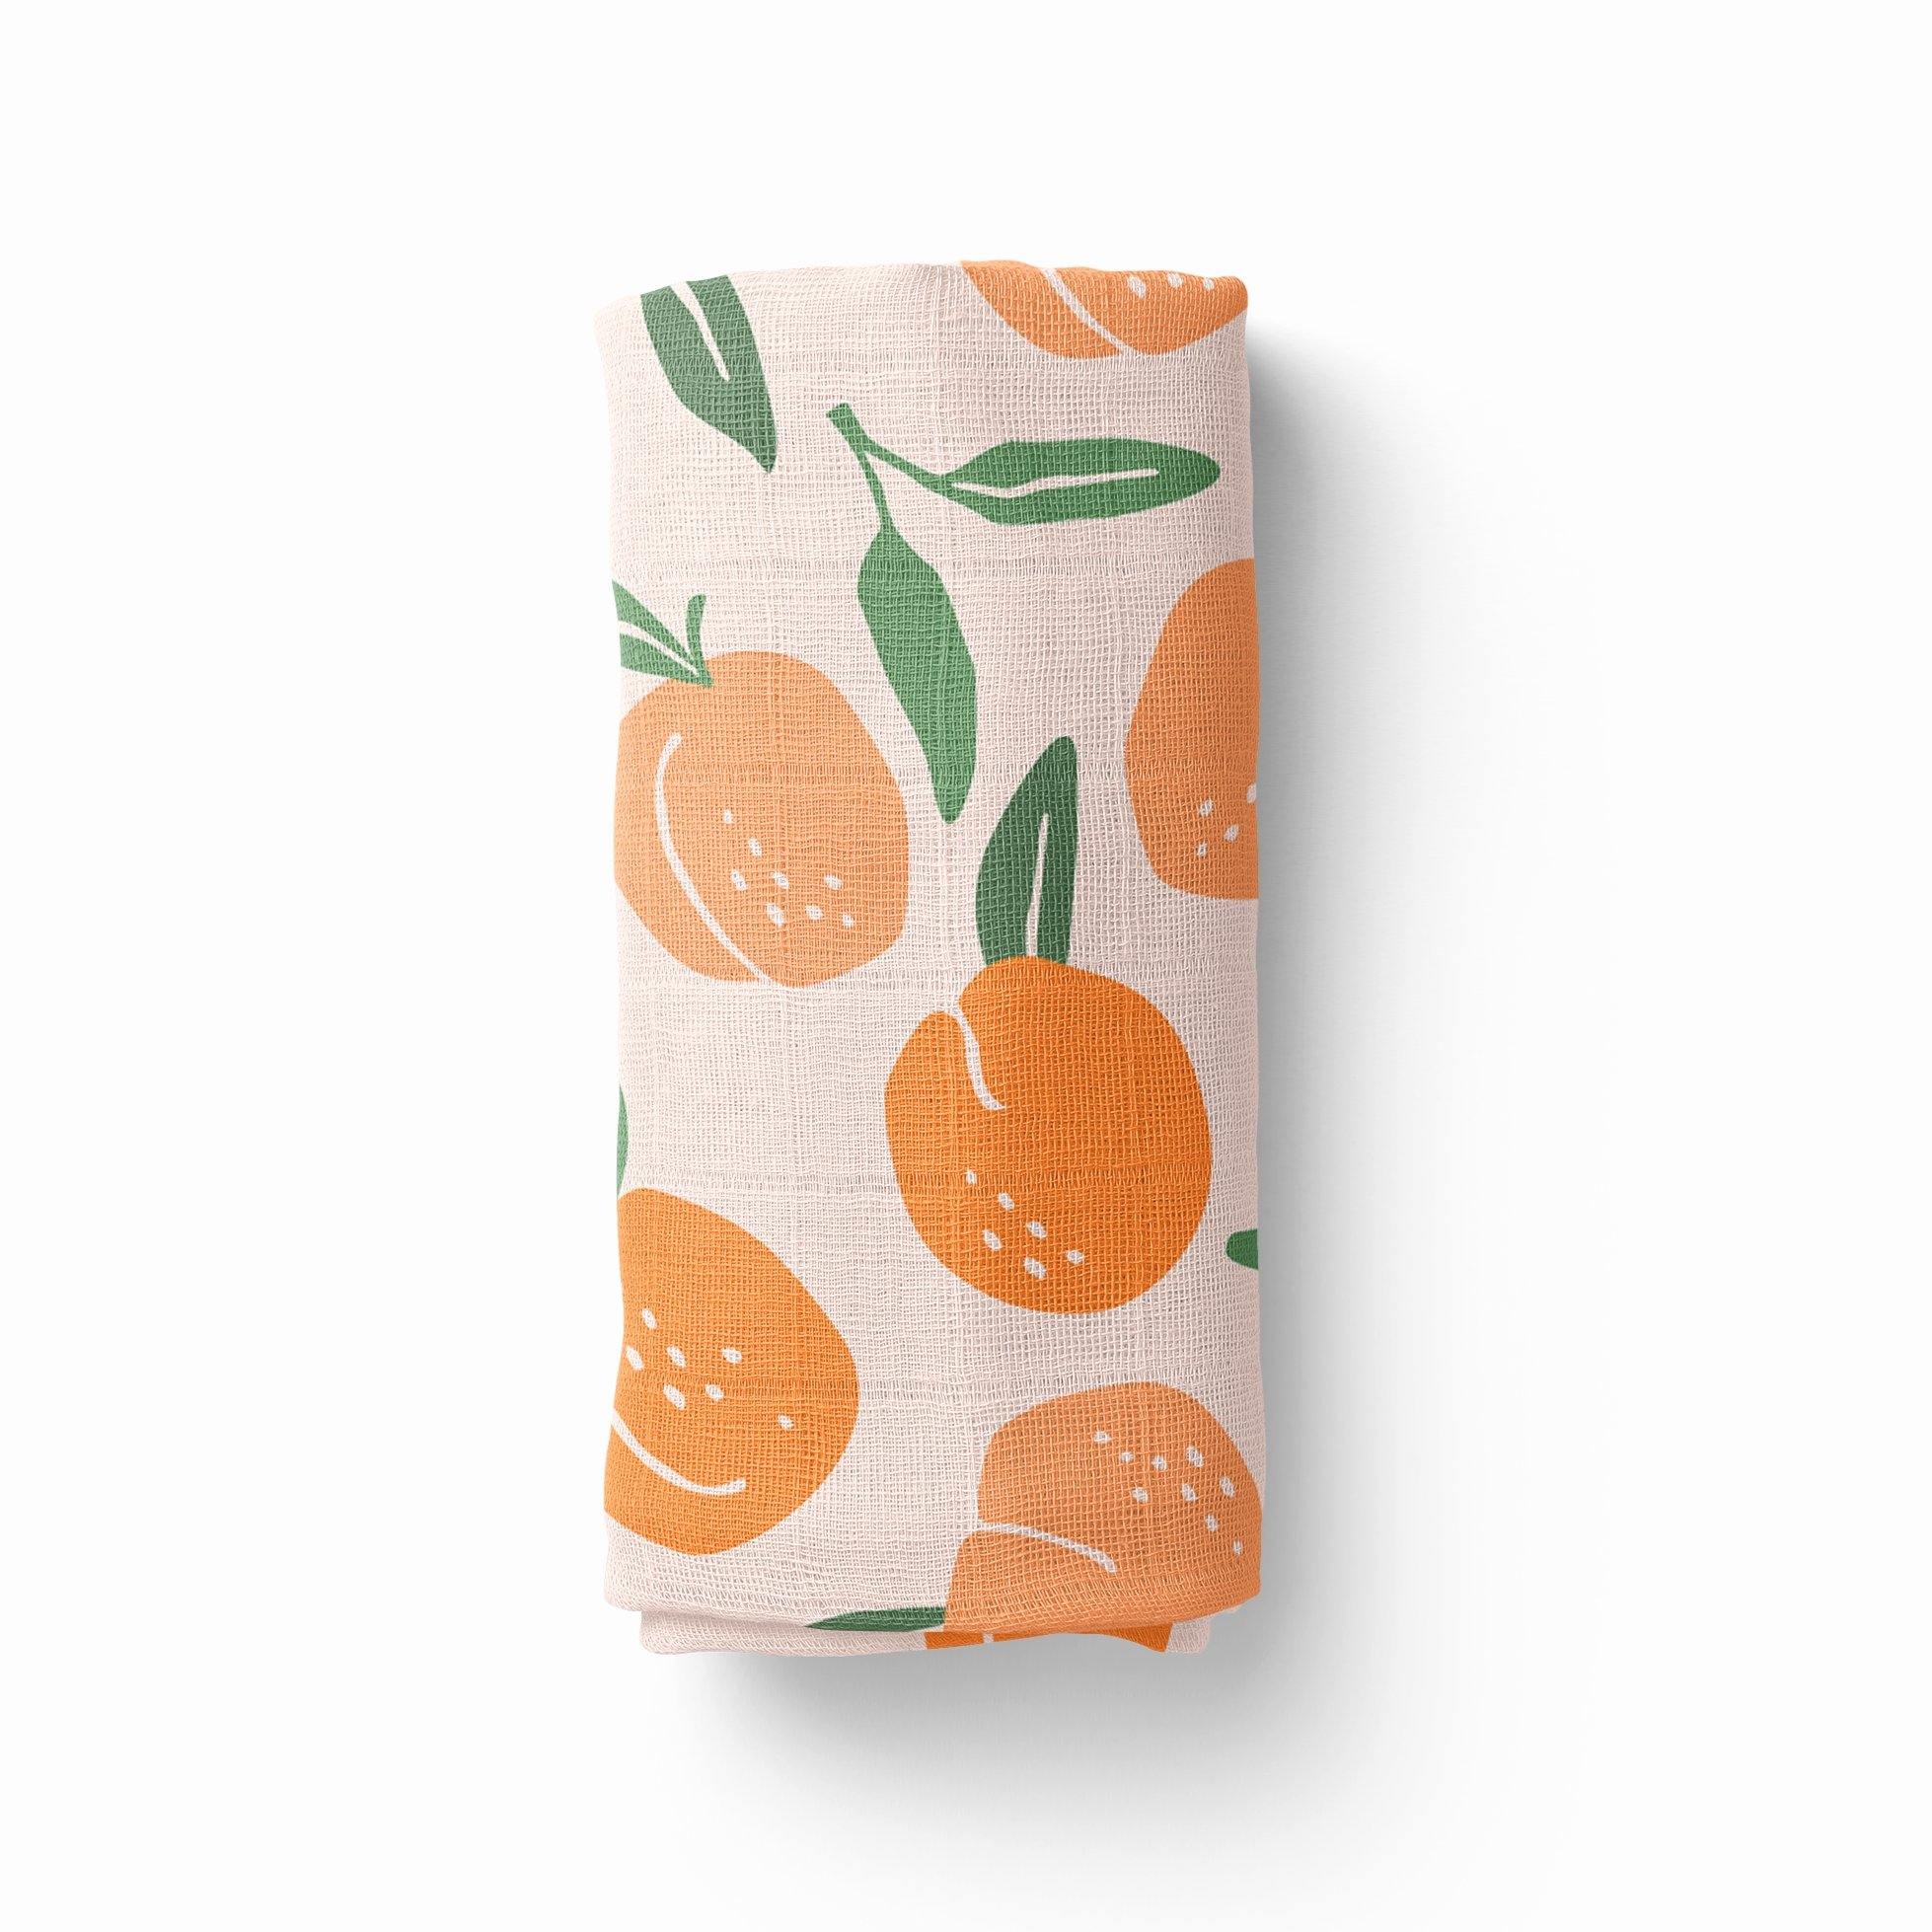 Stretchy Baby Swaddle Blanket in Fresh Peaches Print